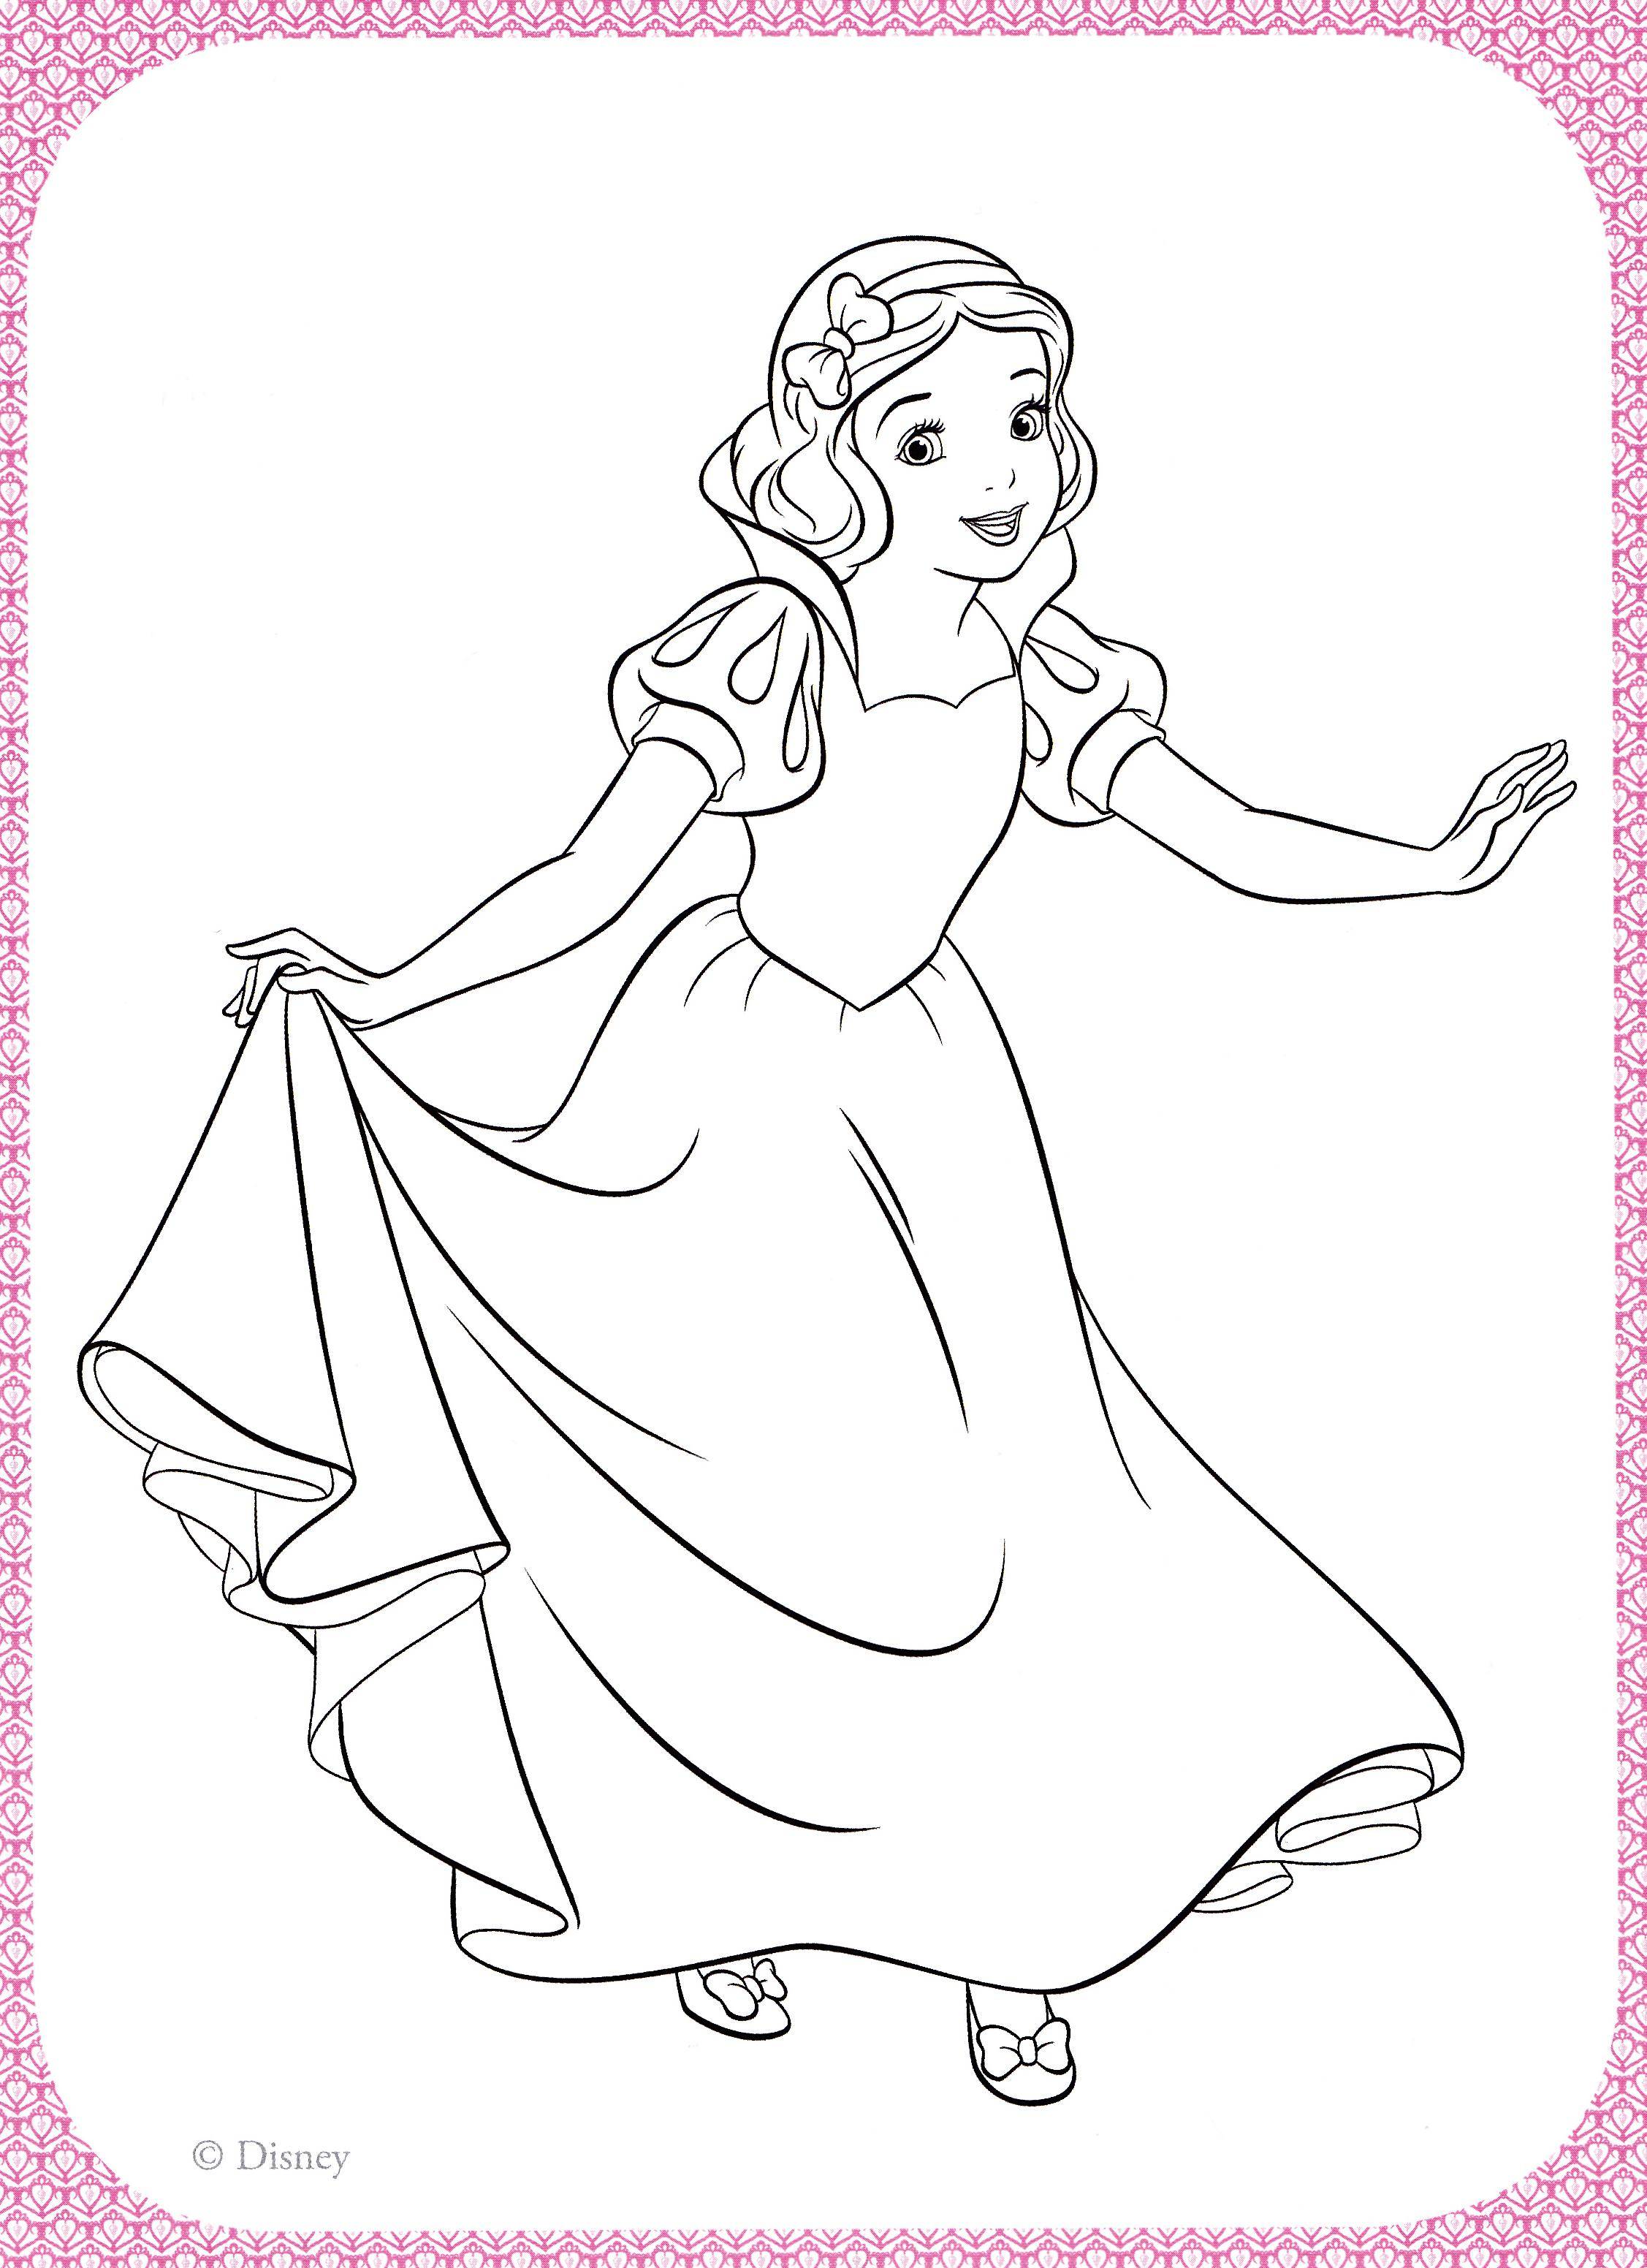 Coloring Darling snow. Category snow white. Tags:  princesses, cartoons, fairy tales, Snow white.